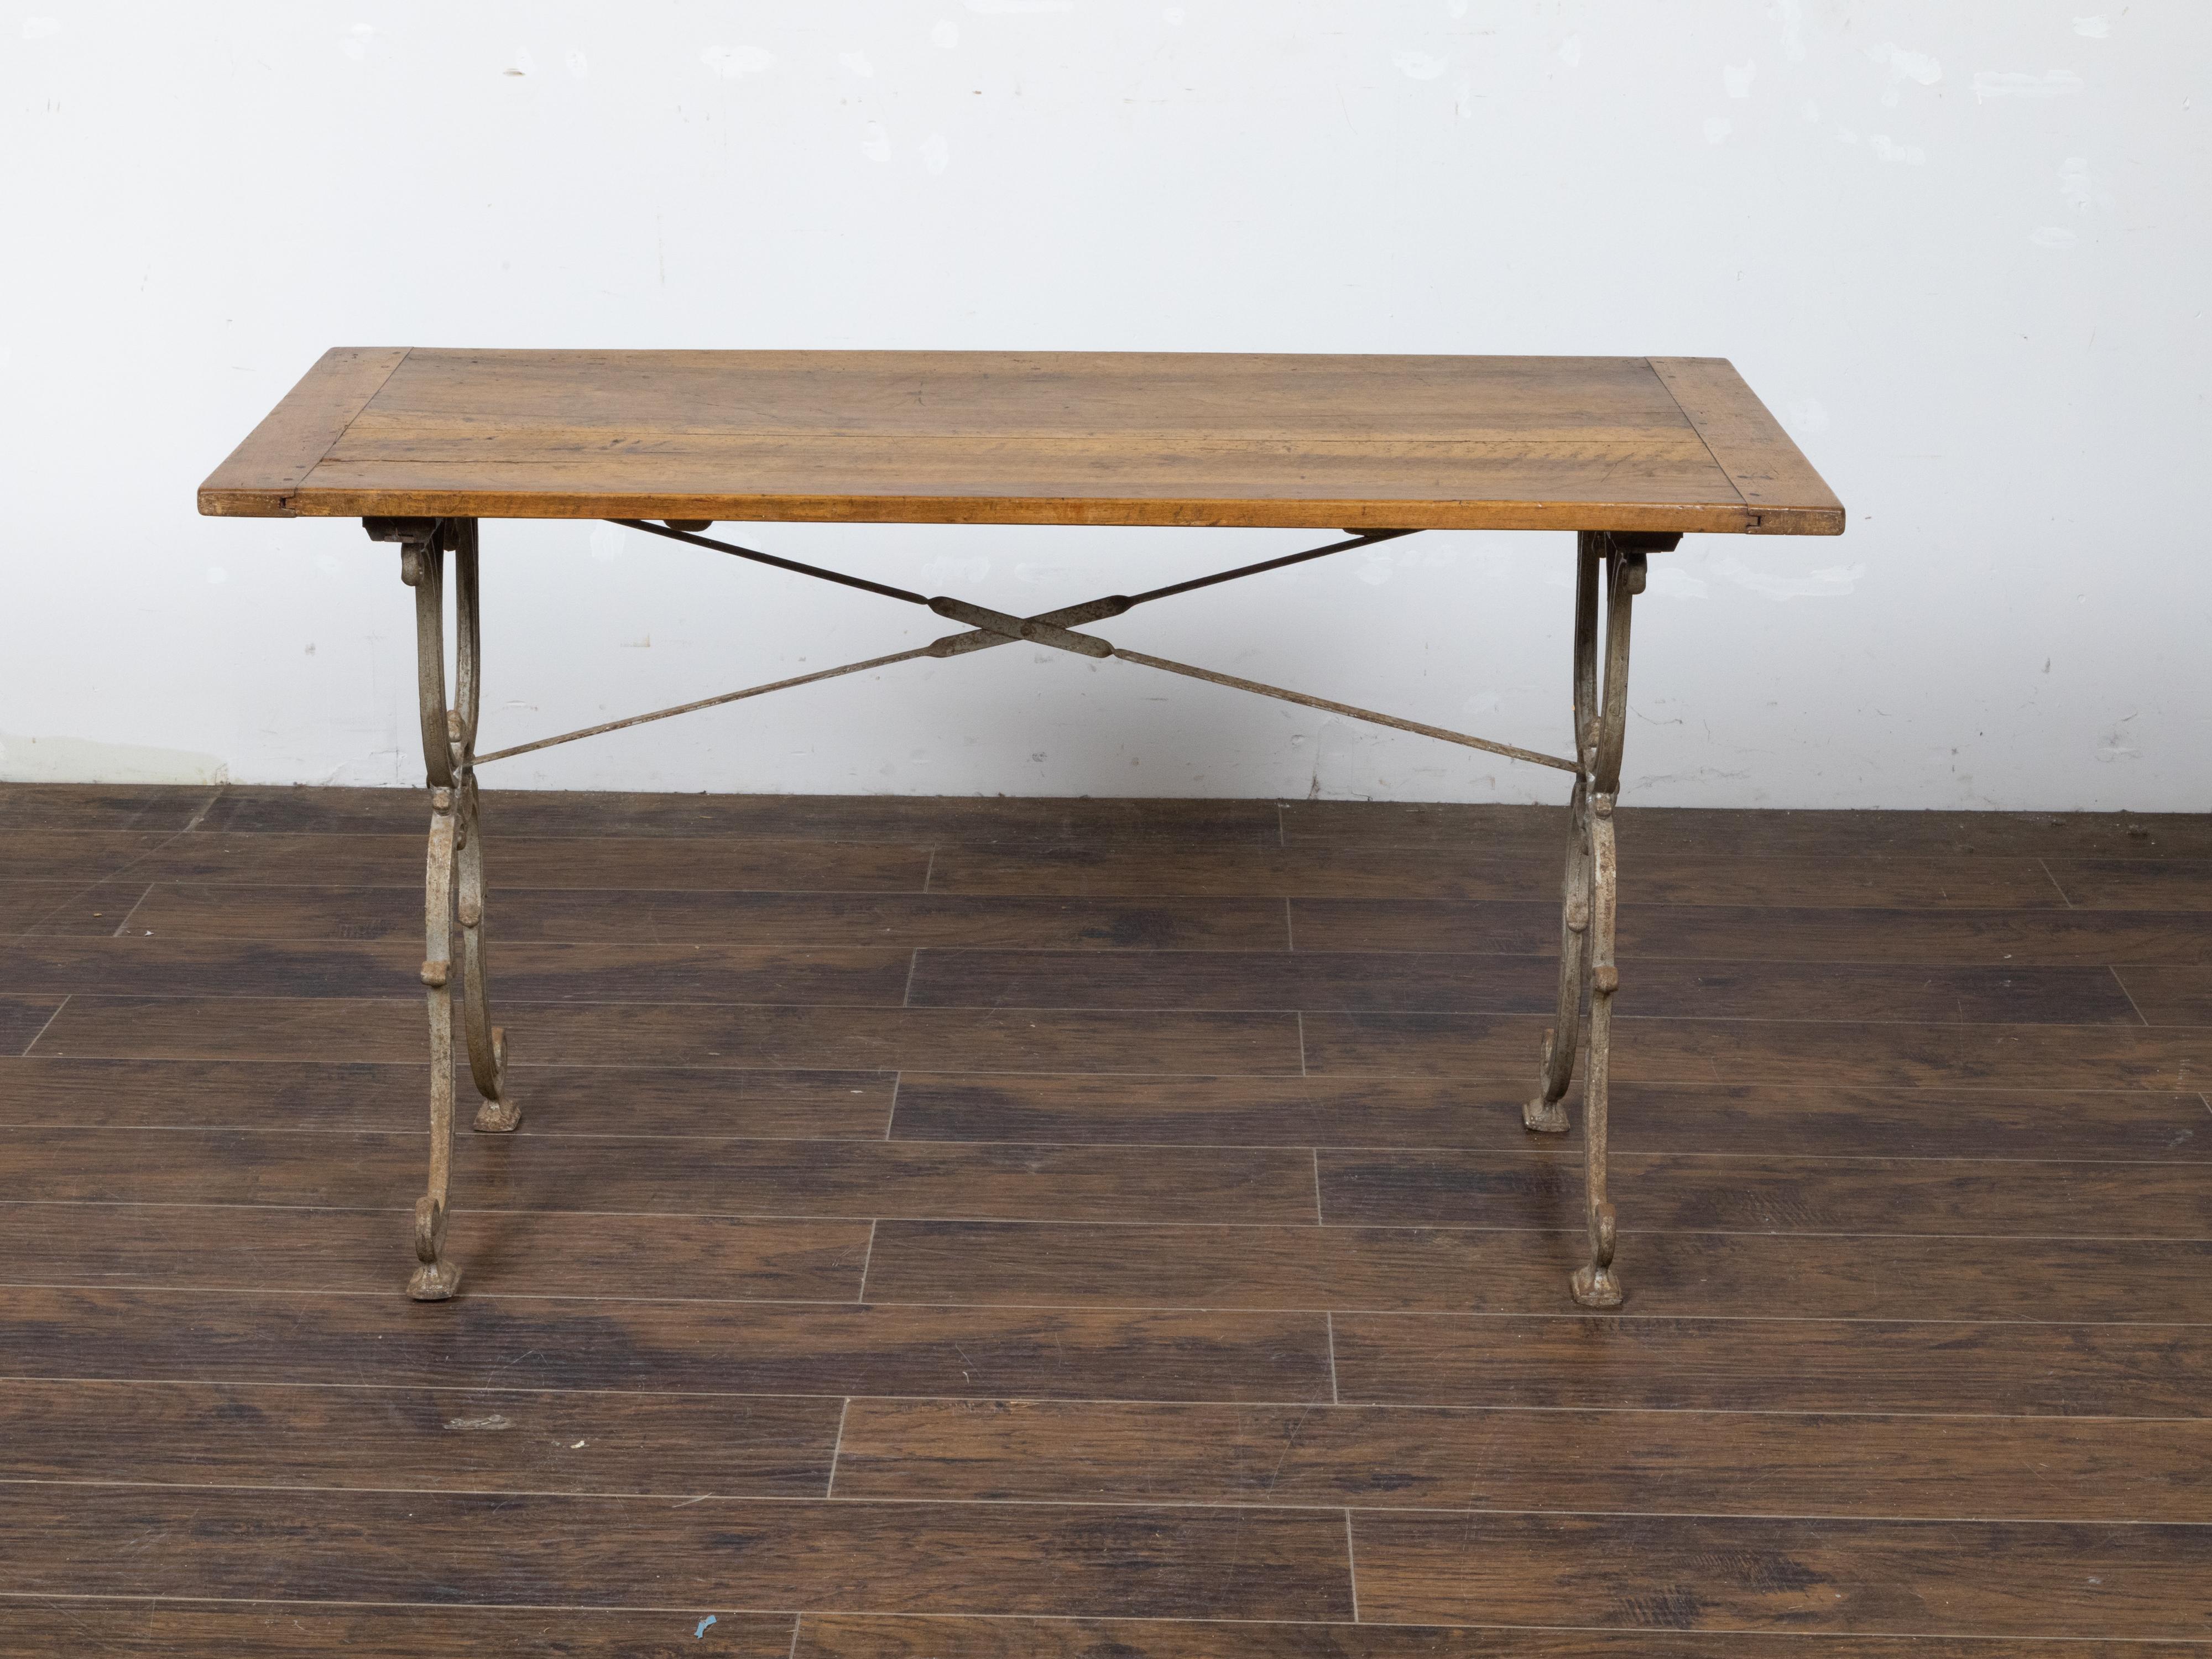 20th Century French 1900s Steel and Wood Console Table with Curving X-Form Legs and Stretcher For Sale